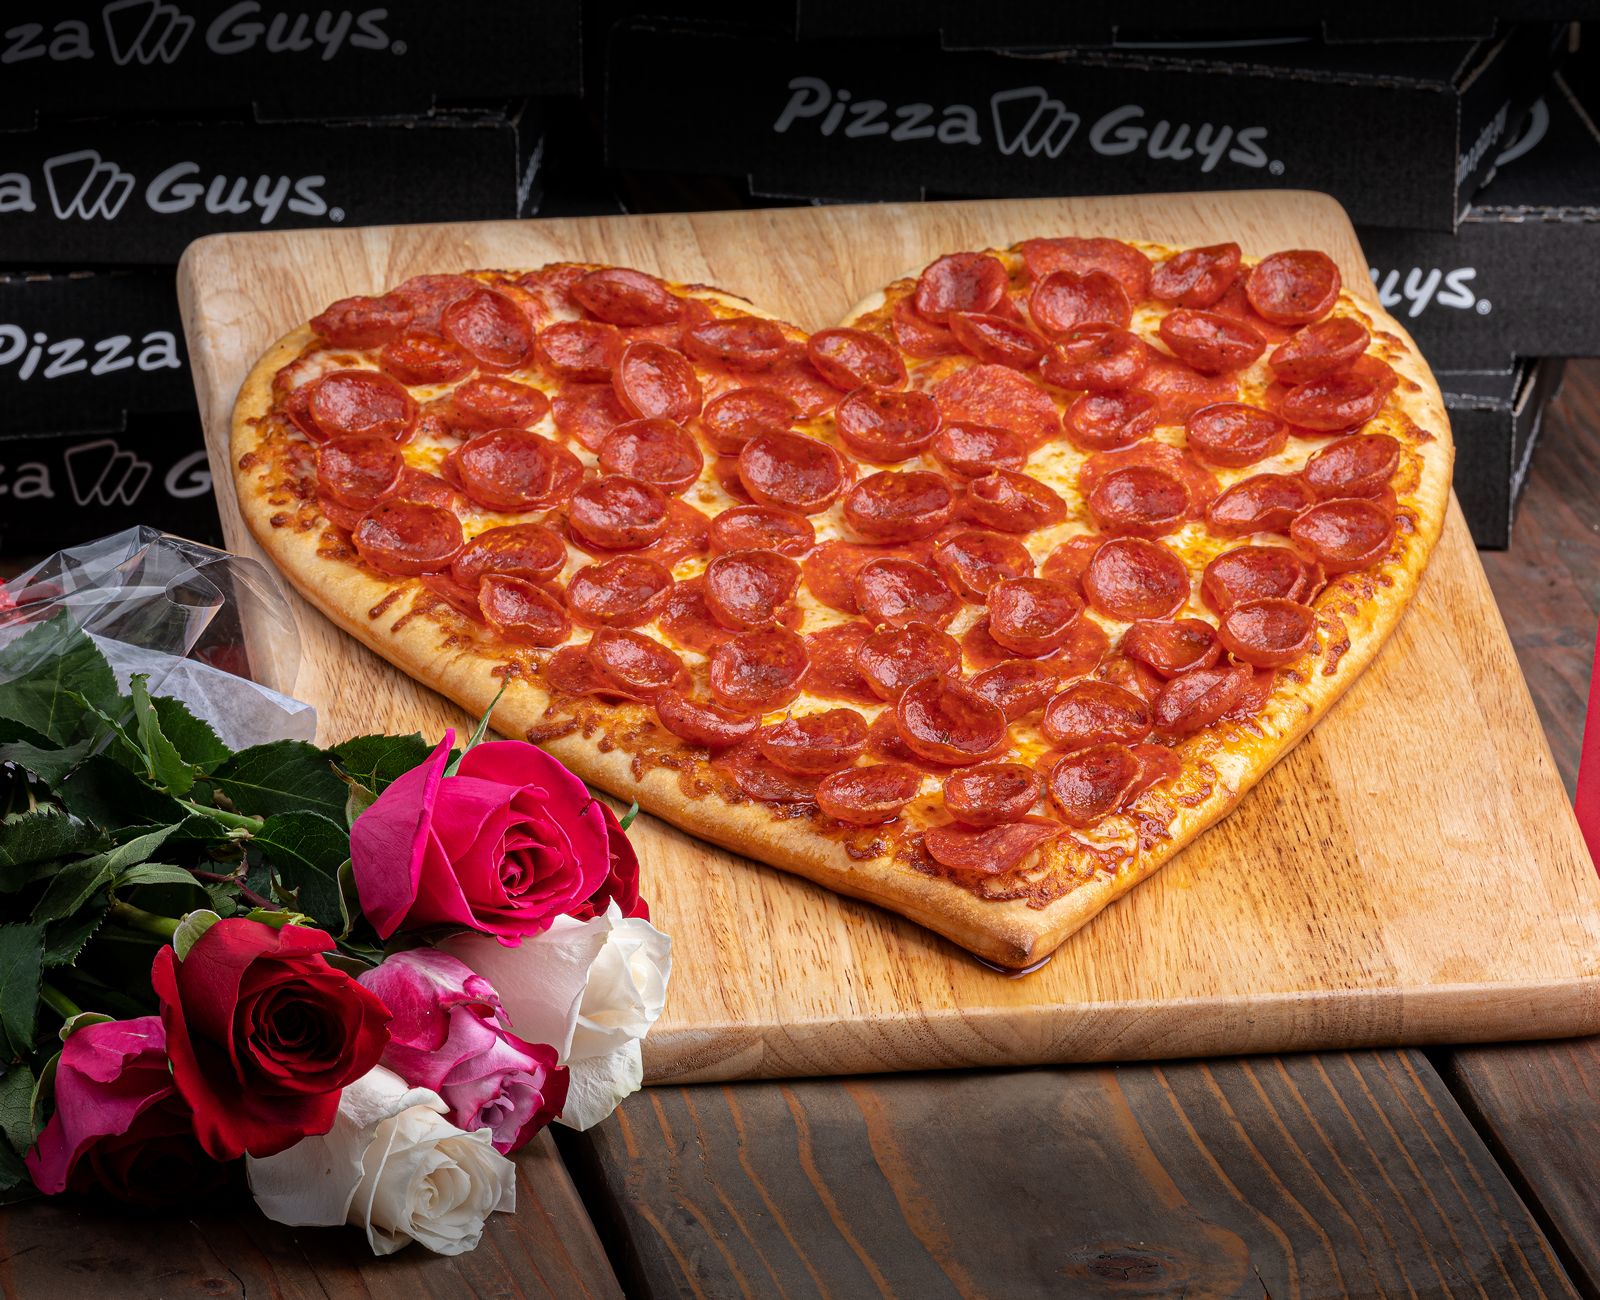 Pizza Guys Celebrates Valentine's Day with Heart-Shaped Pizzas